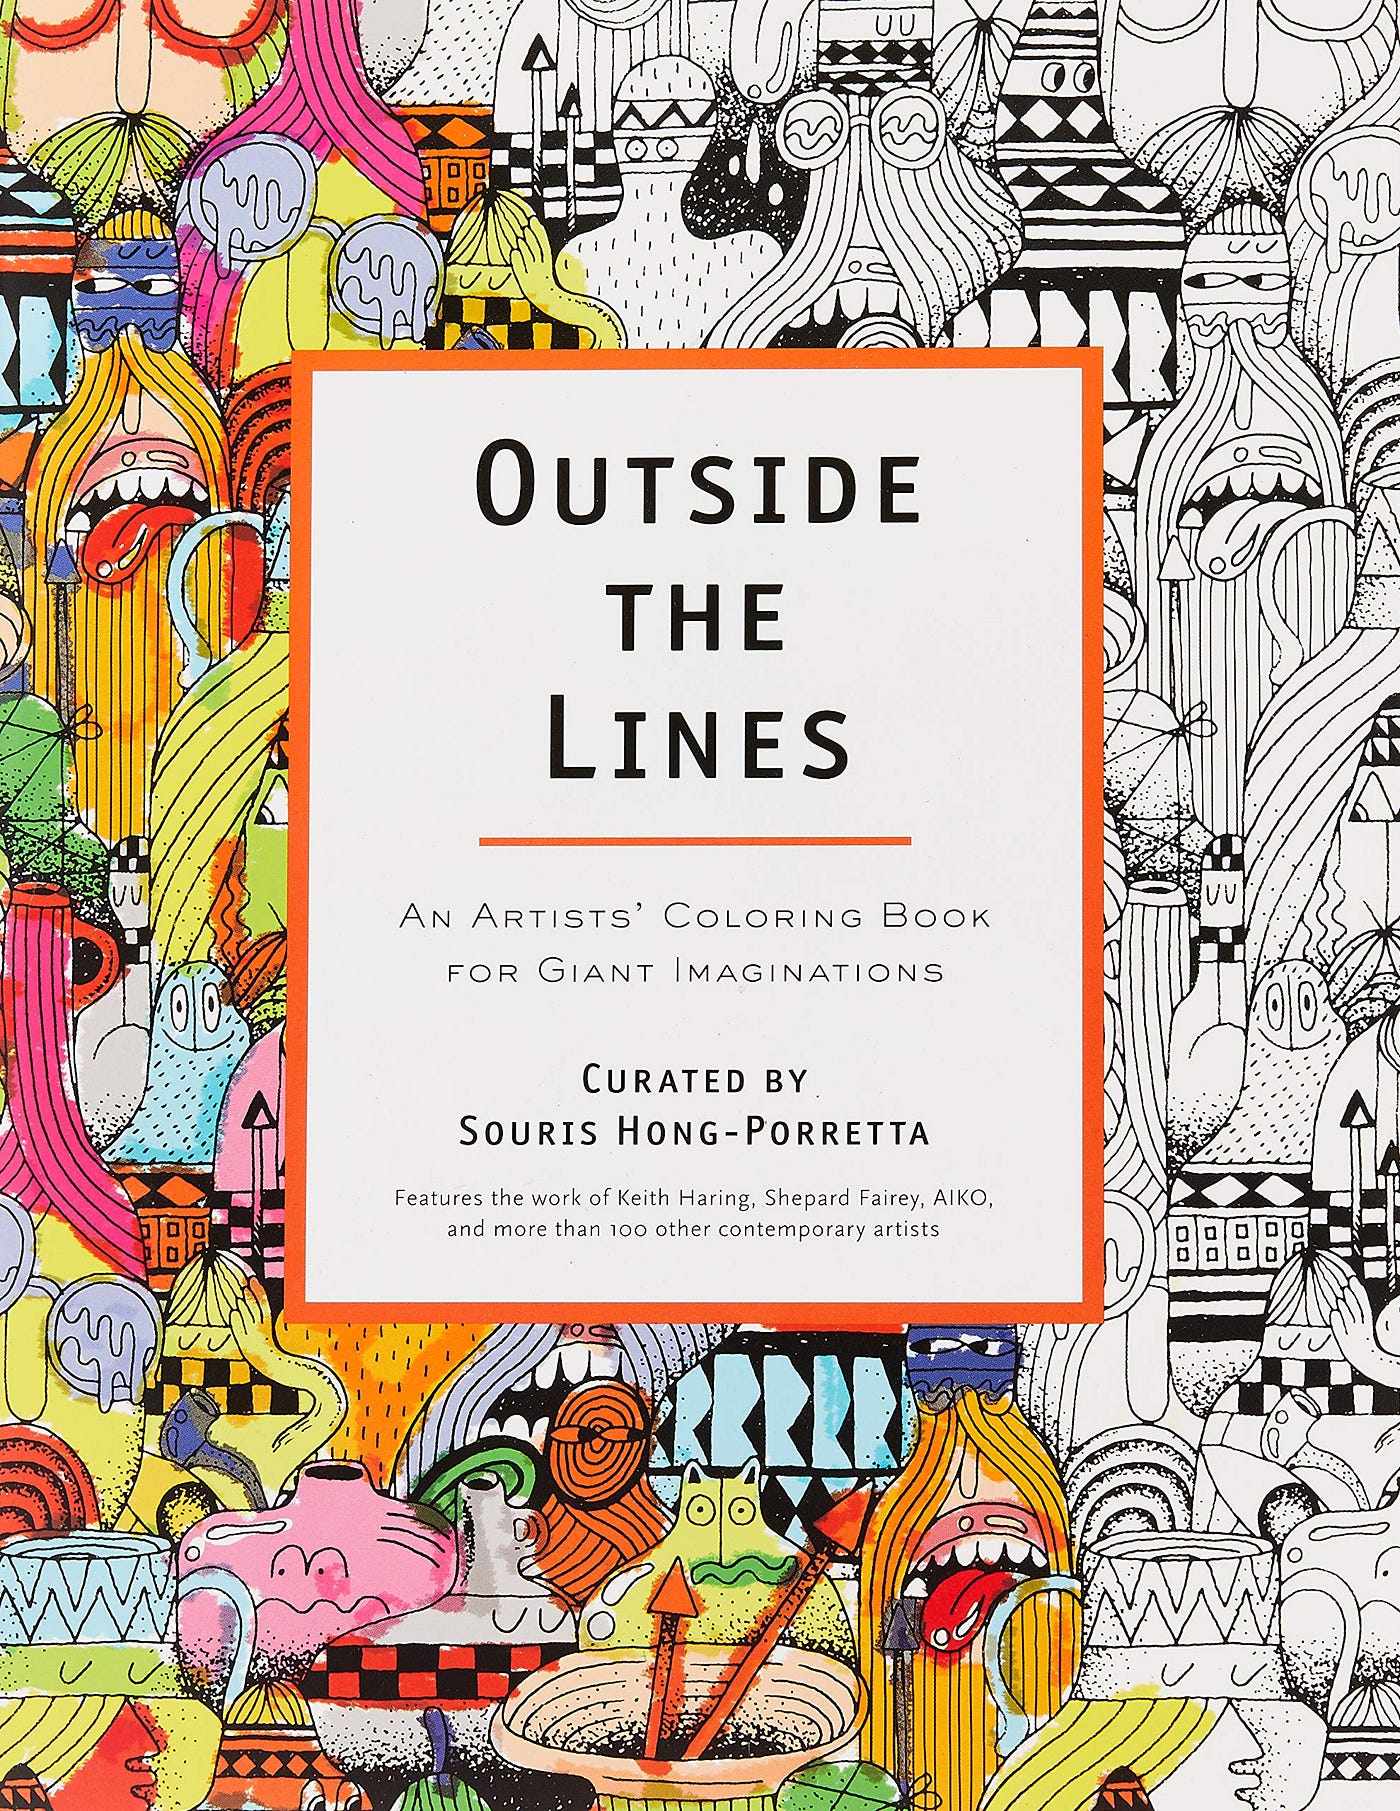 The Best Adult Coloring Books to Destress Right Now — Blog